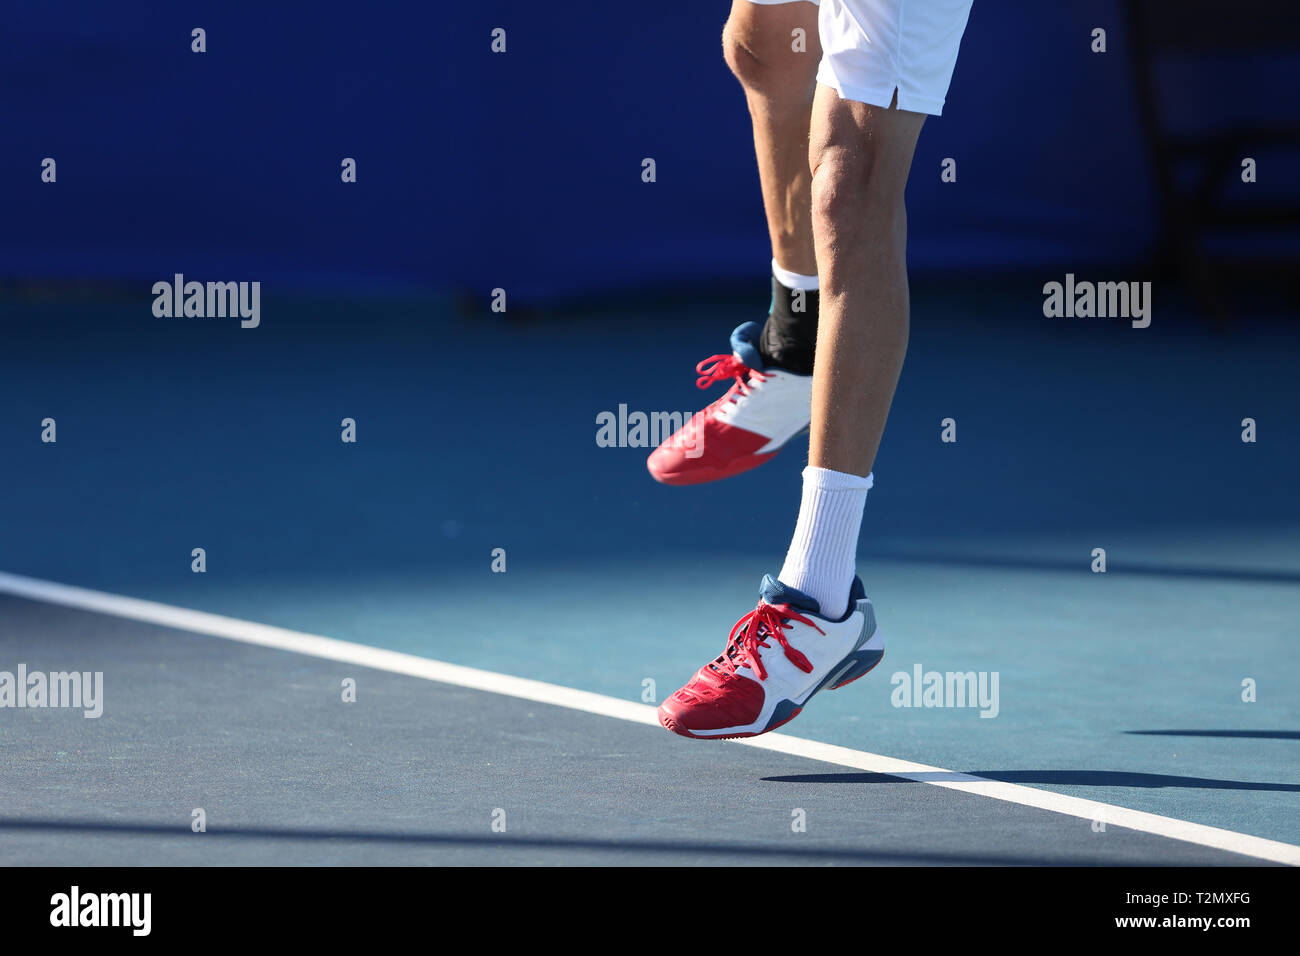 tenis player jumping Stock Photo